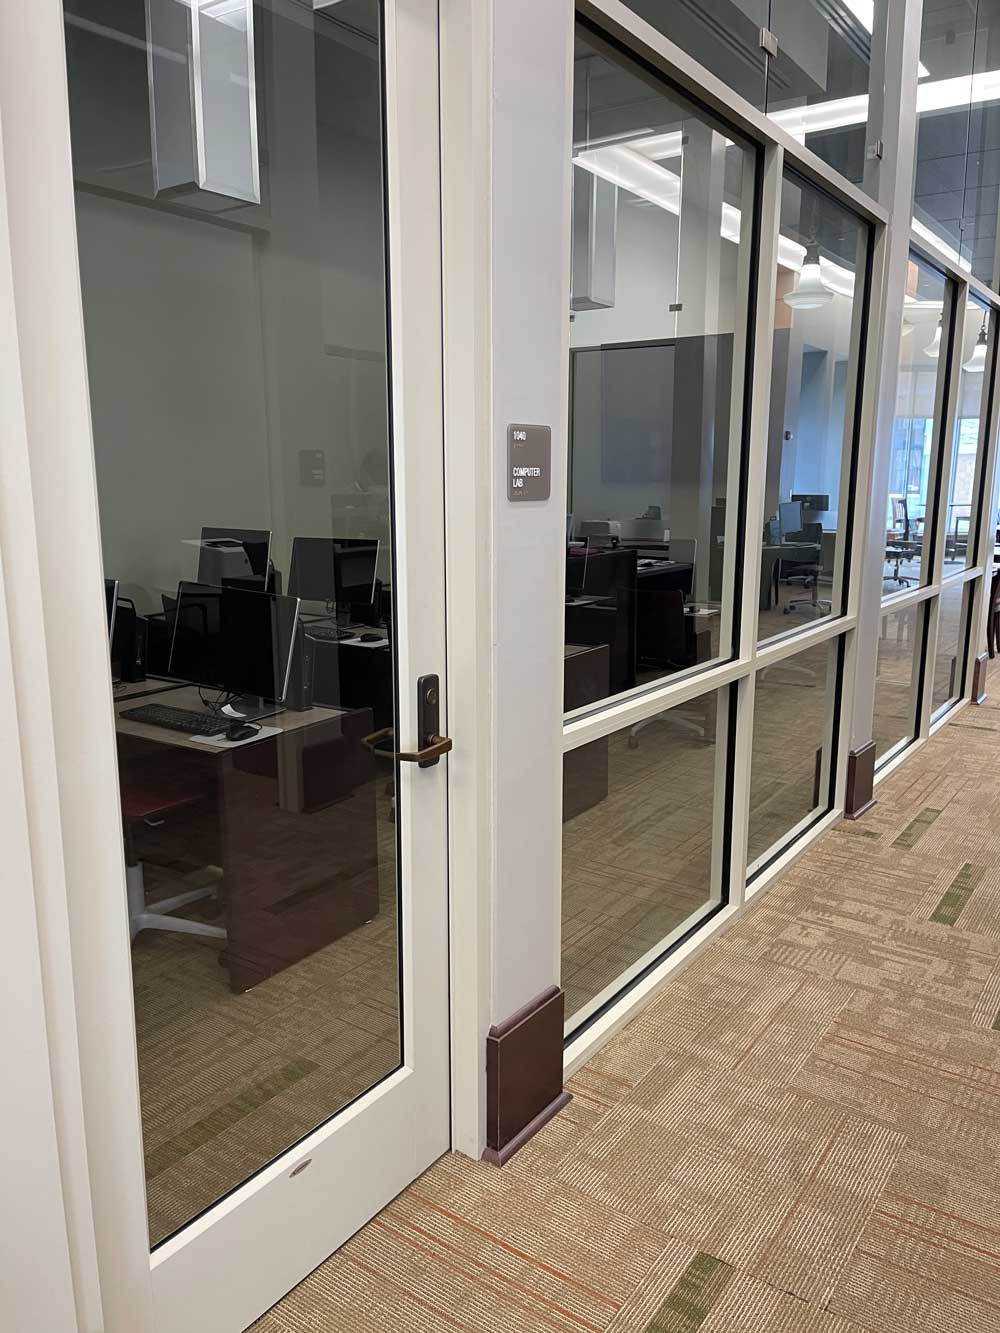 Looking through the glass door and wall into the computer lab where there are rows of tables with black desktop computers and a large tv monitor at the front of the space